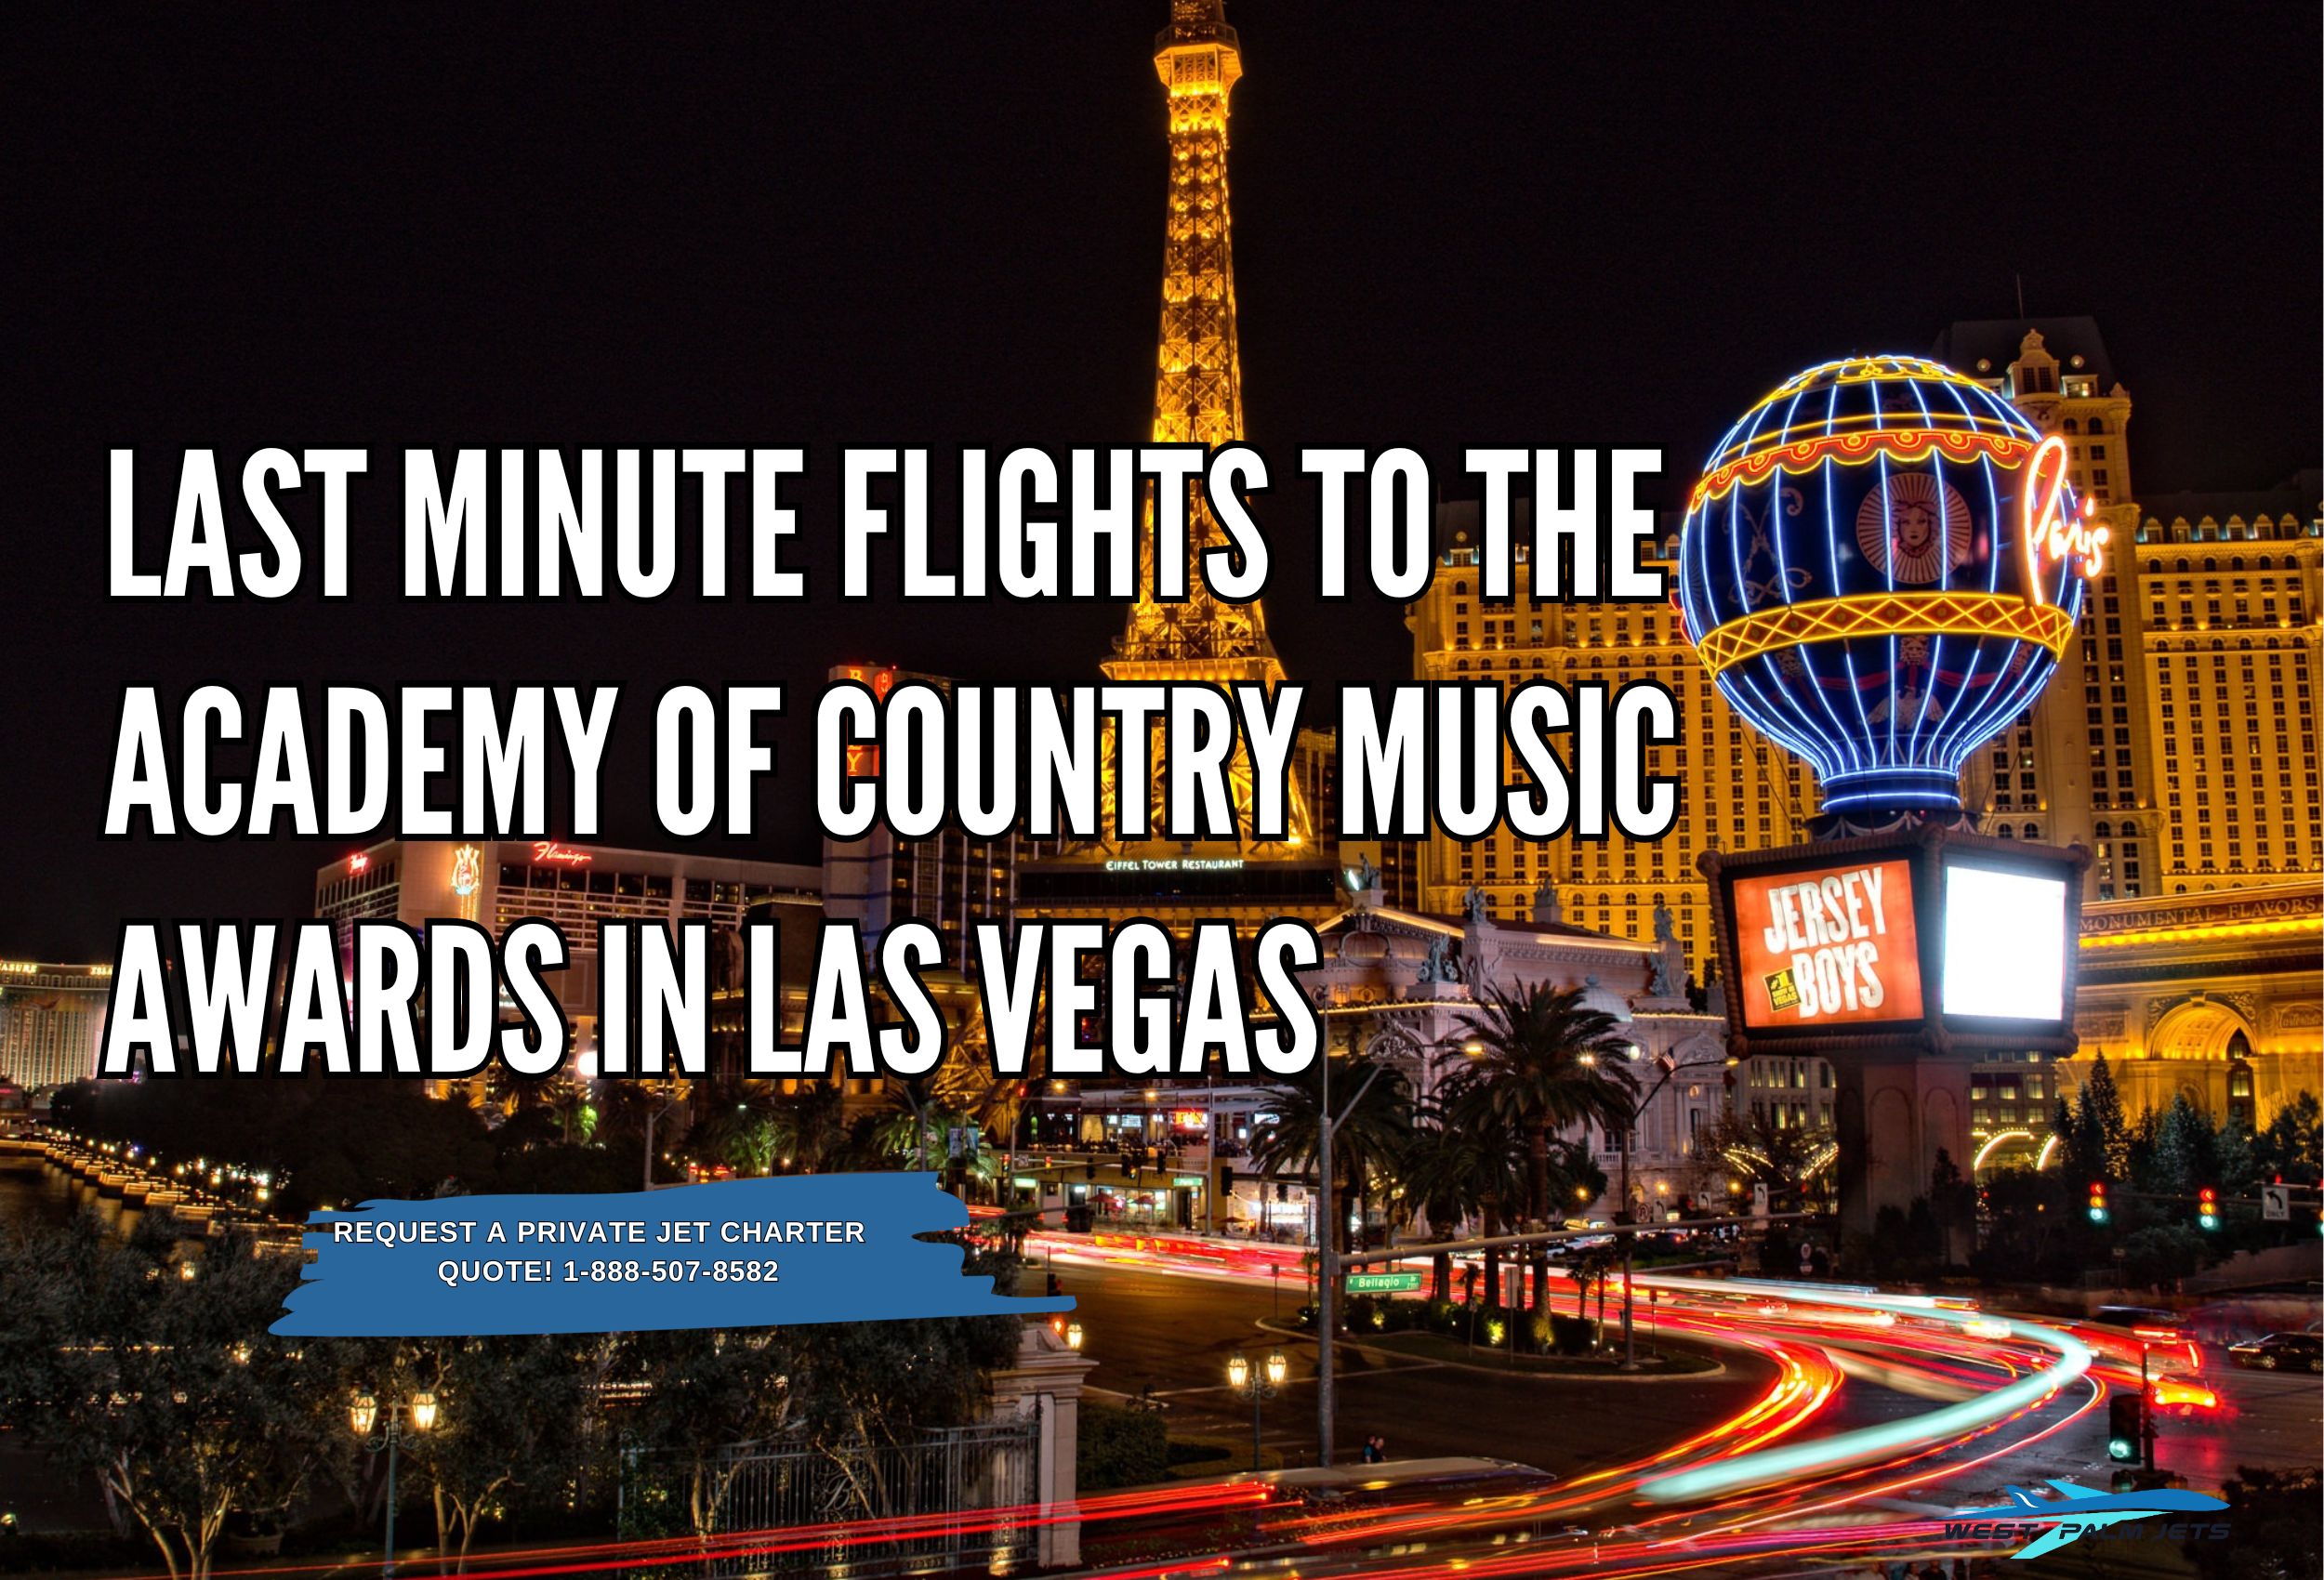 Last Minute Flights to the Academy of Country Music Awards in Las Vegas